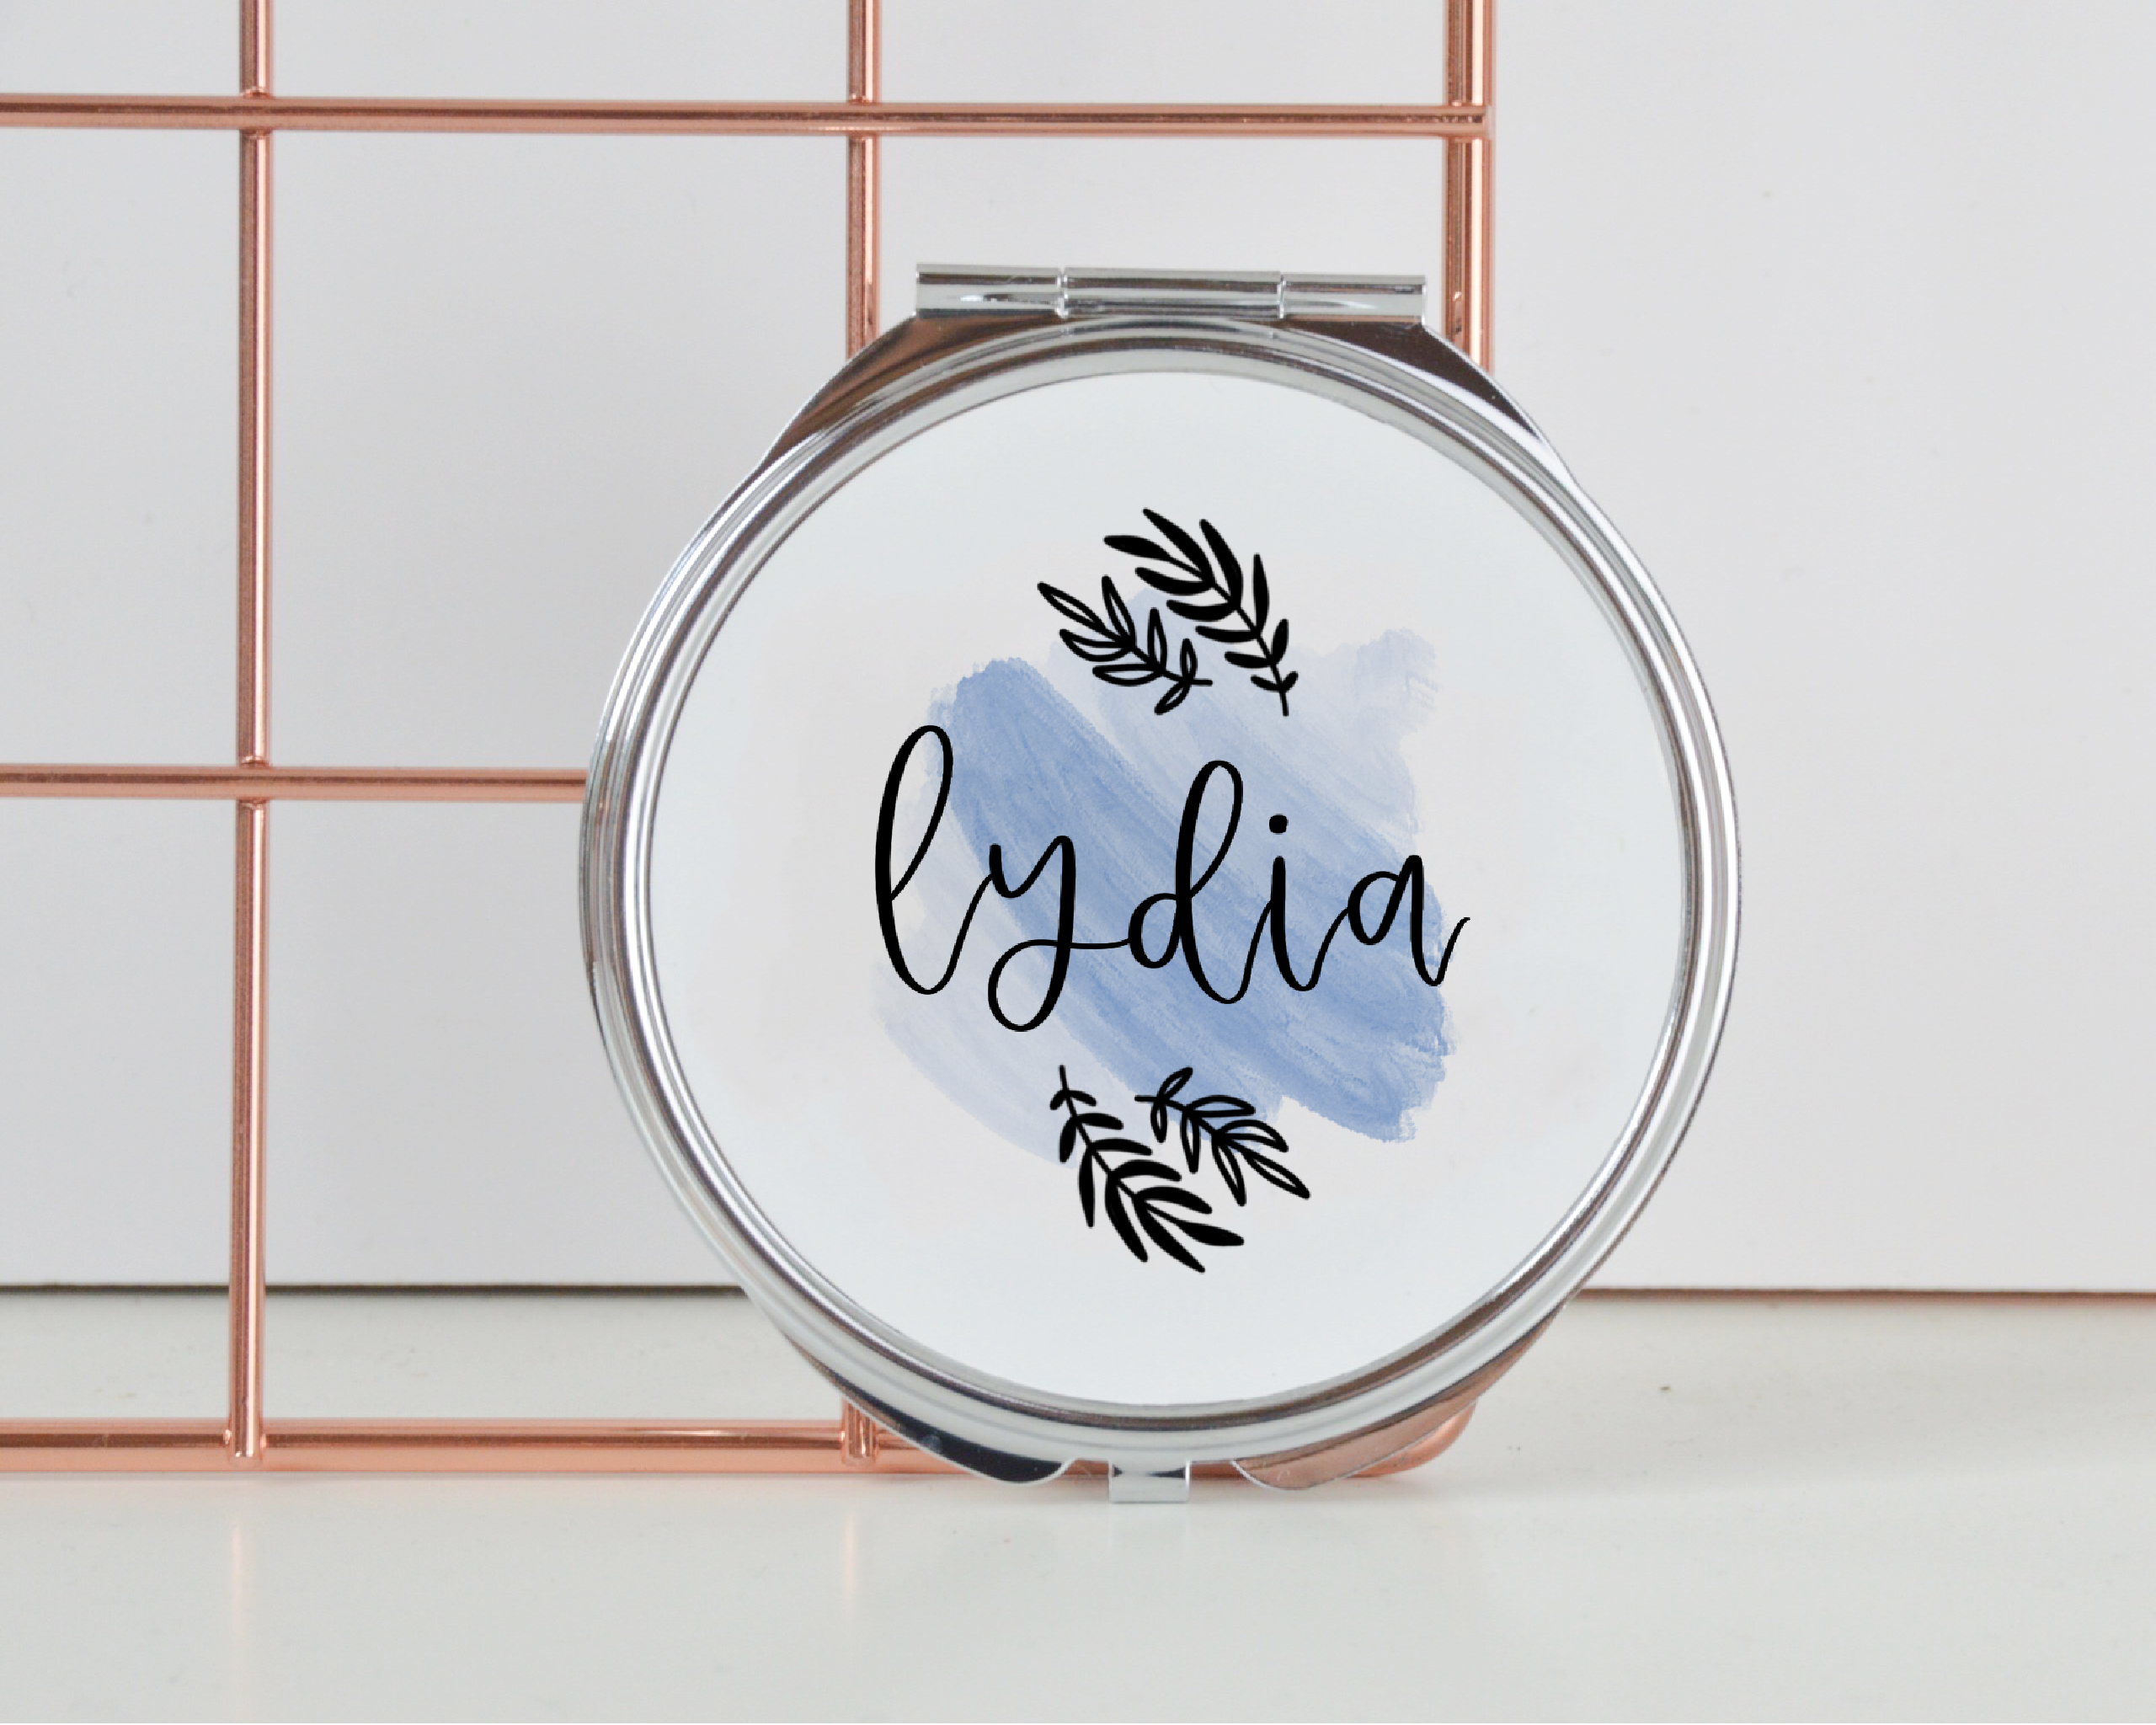 Personalised Name Compact Mirror - You Make My Dreams